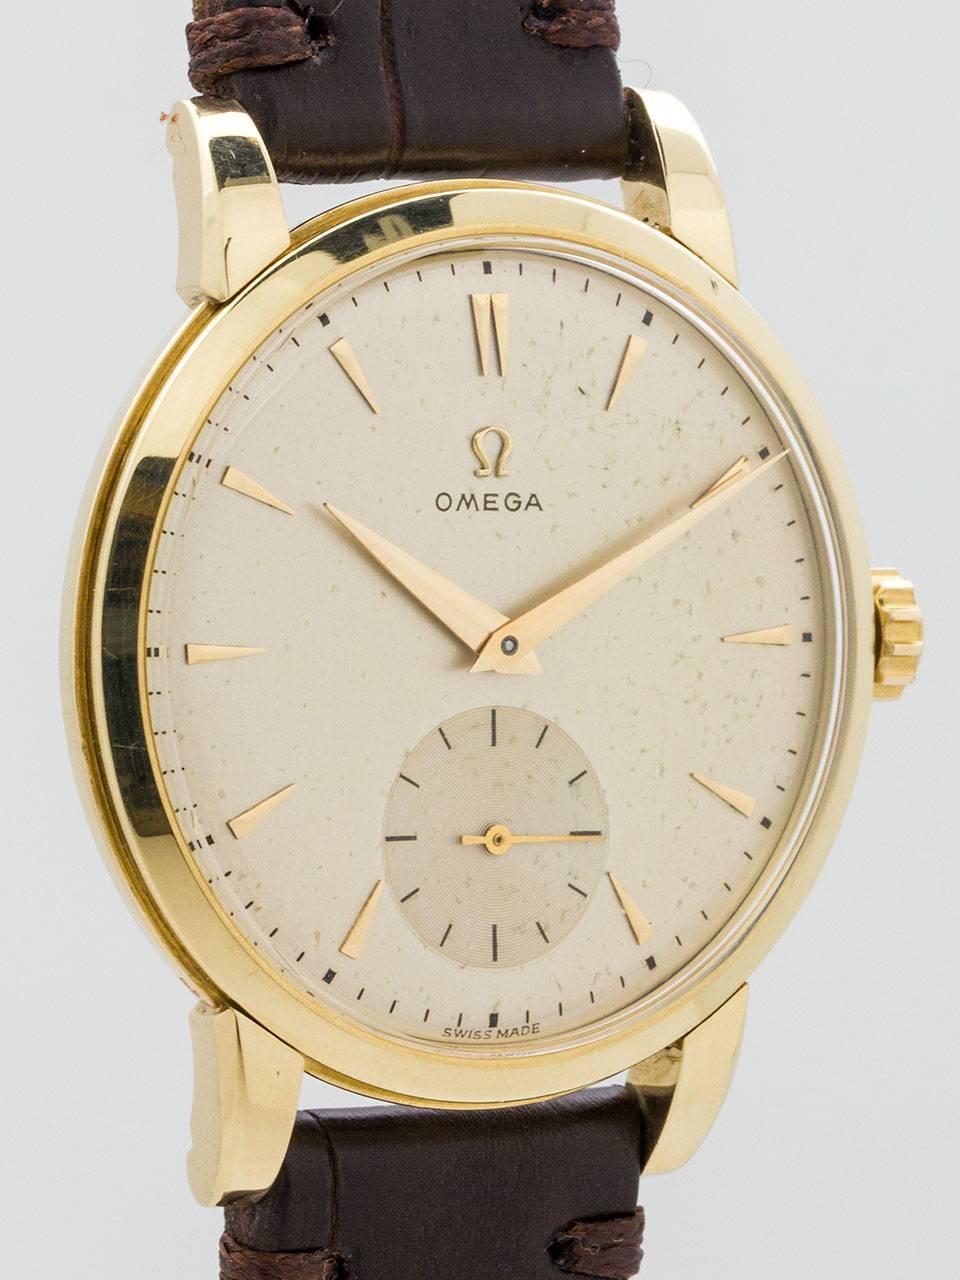 Omega 14K Yellow Gold oversize dress model circa 1950s. 36 x 42mm case with wide sloped bezel and acrylic crystal. Original silvered satin dial with gold applied markers and oversize gilt tapered hands. Powered by calibre 265 manual wind movement